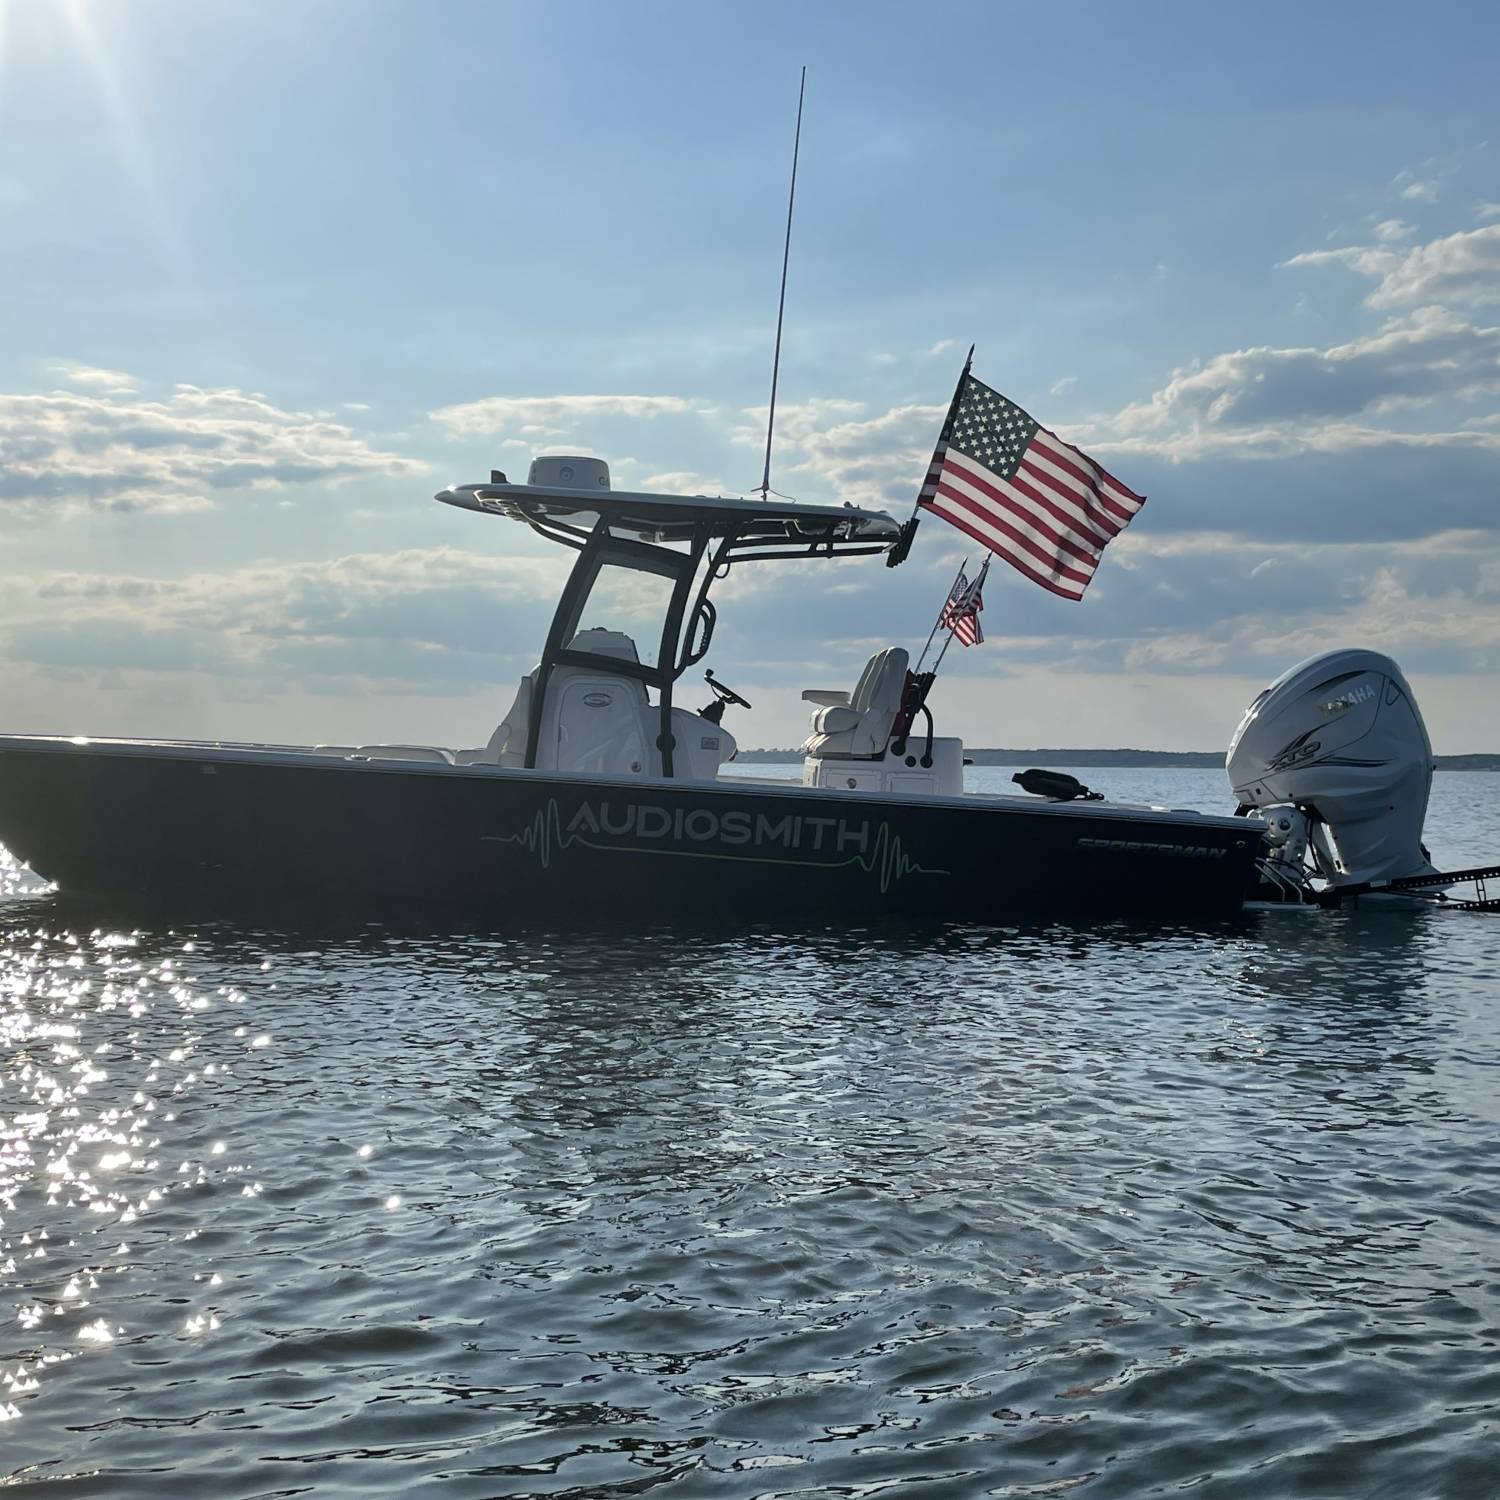 Title: Island 🏝 Hoping - On board their Sportsman Masters 267OE Bay Boat - Location: Cedar Point, NC. Participating in the Photo Contest #SportsmanAugust2021